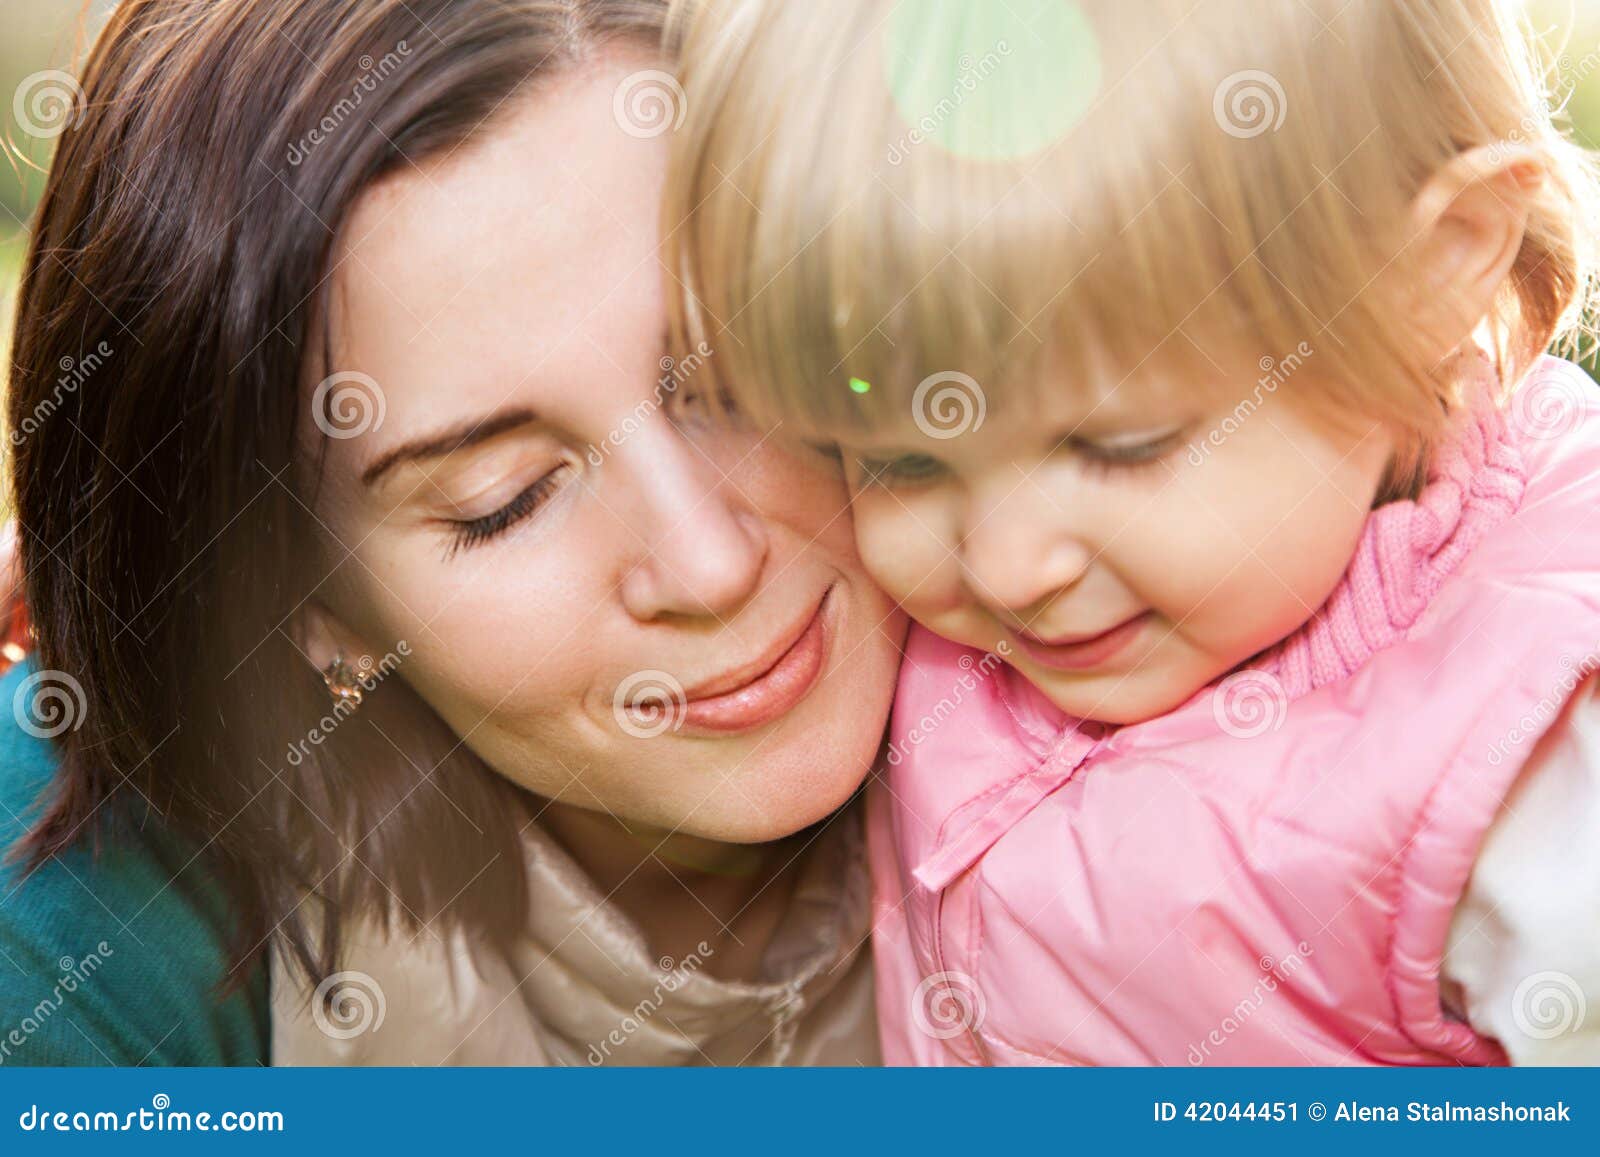 Gentle Embrace Between Young Woman And Daughter Stock Image Image Of Expressing Little 42044451 